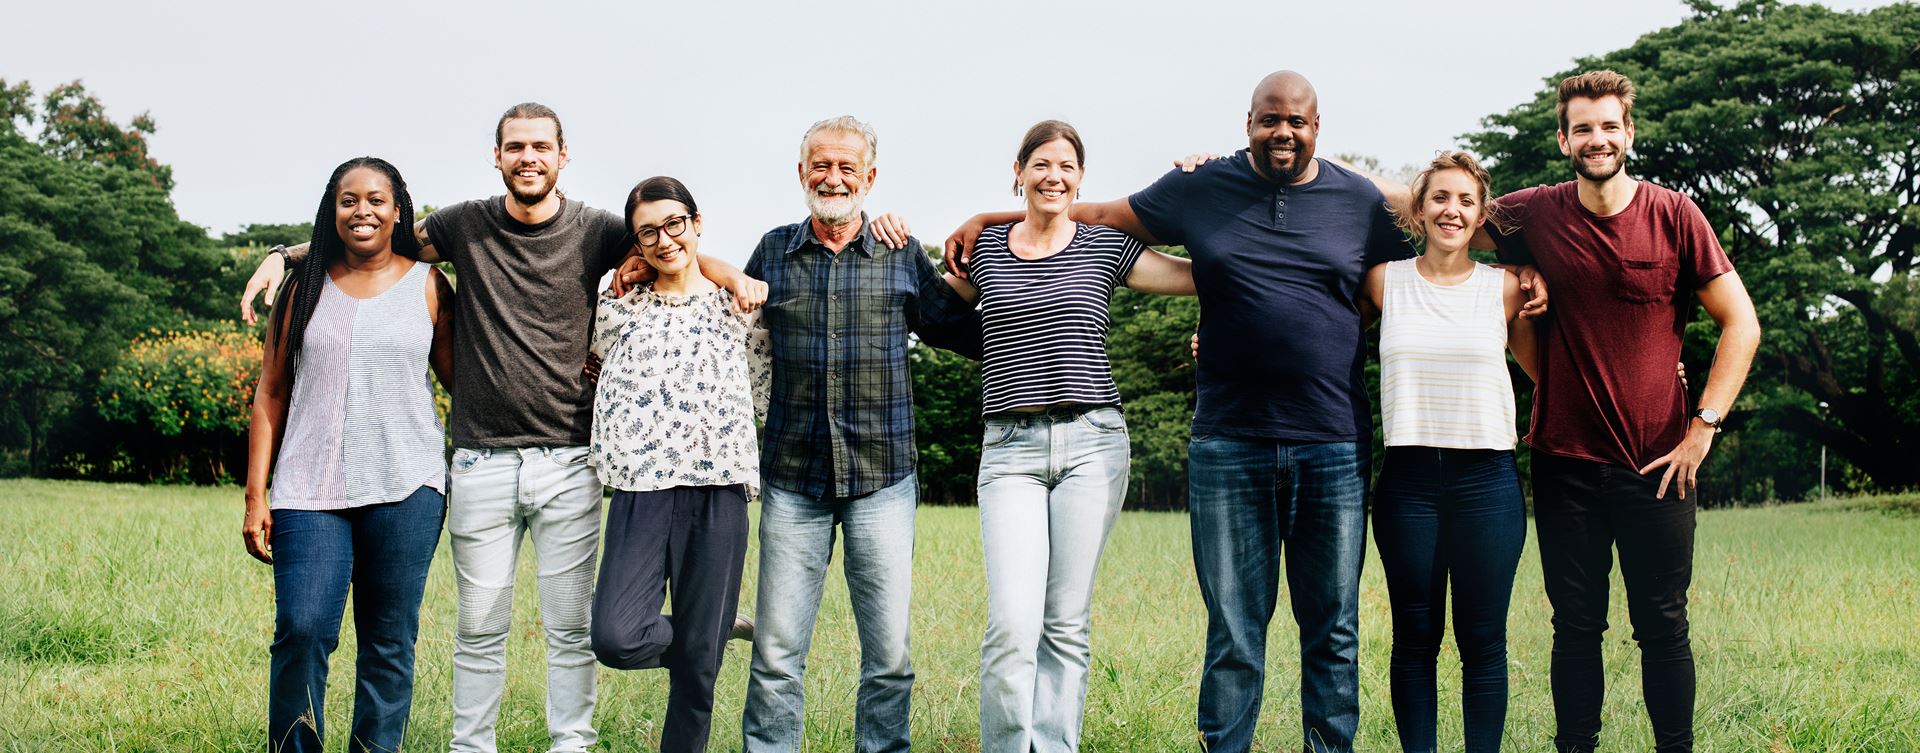 Diverse group of people smiling together in a field